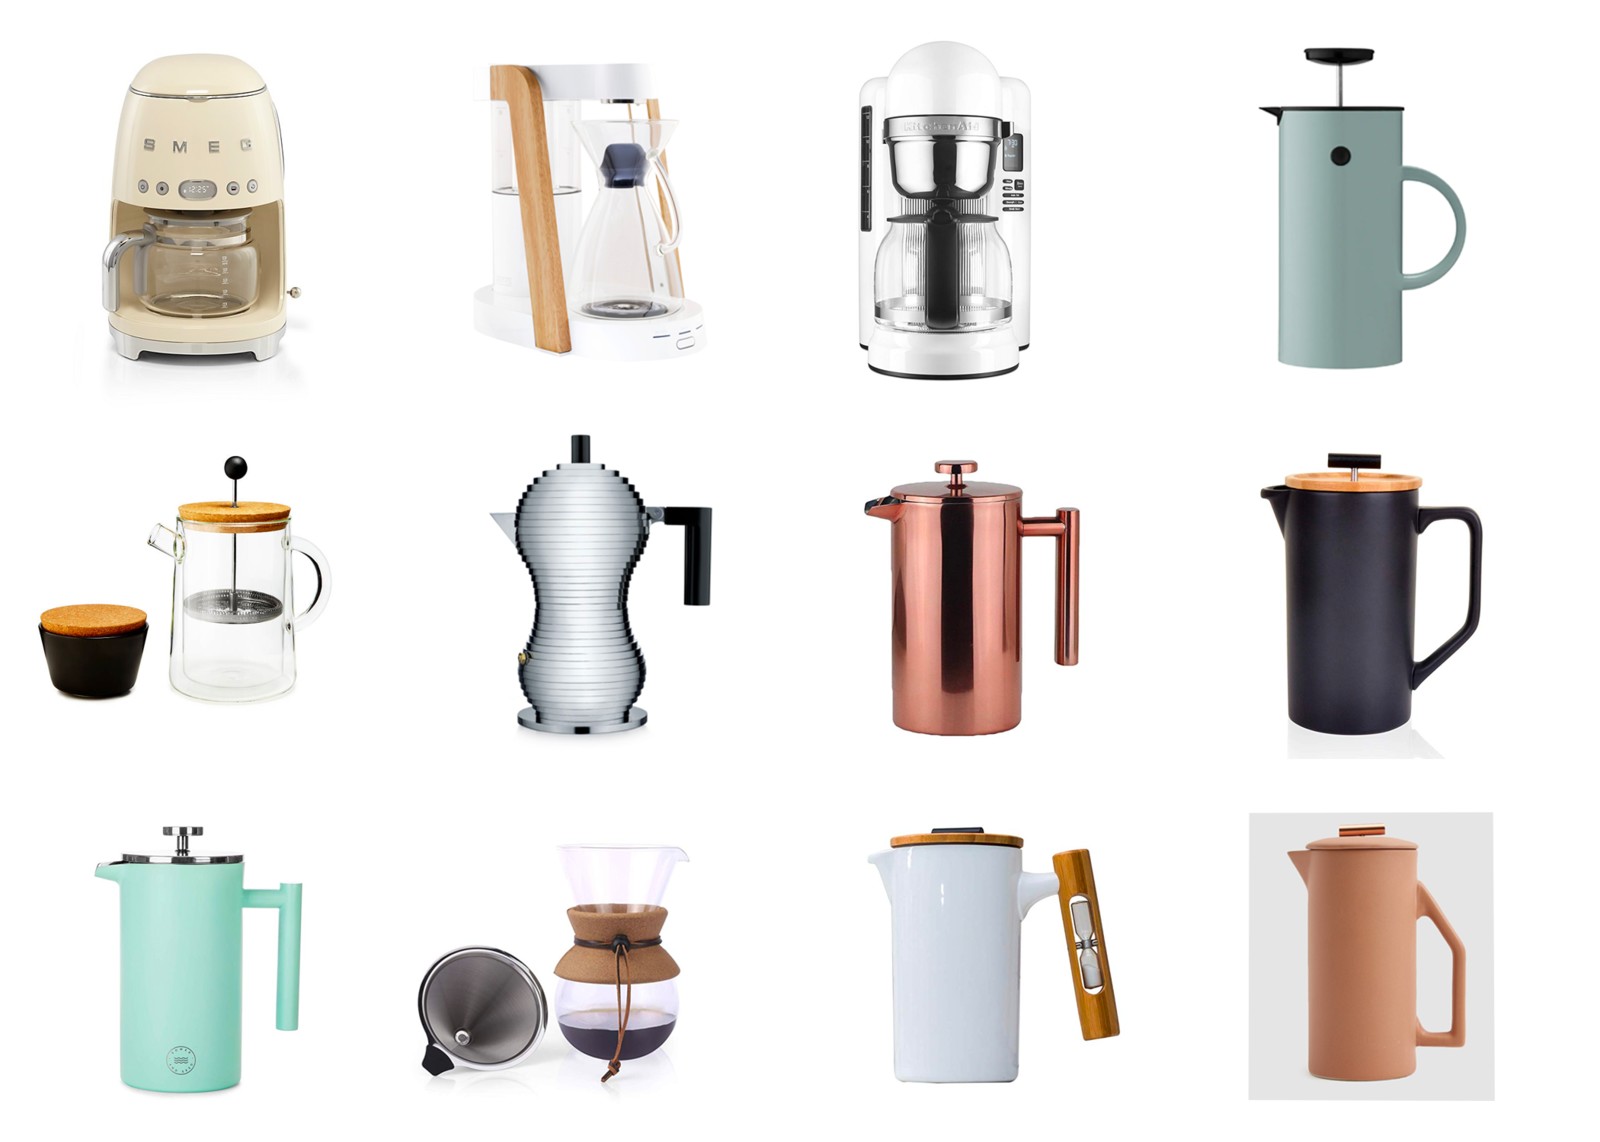 Pretty Ugly: Toasters, Coffee Makers + Dishwashing